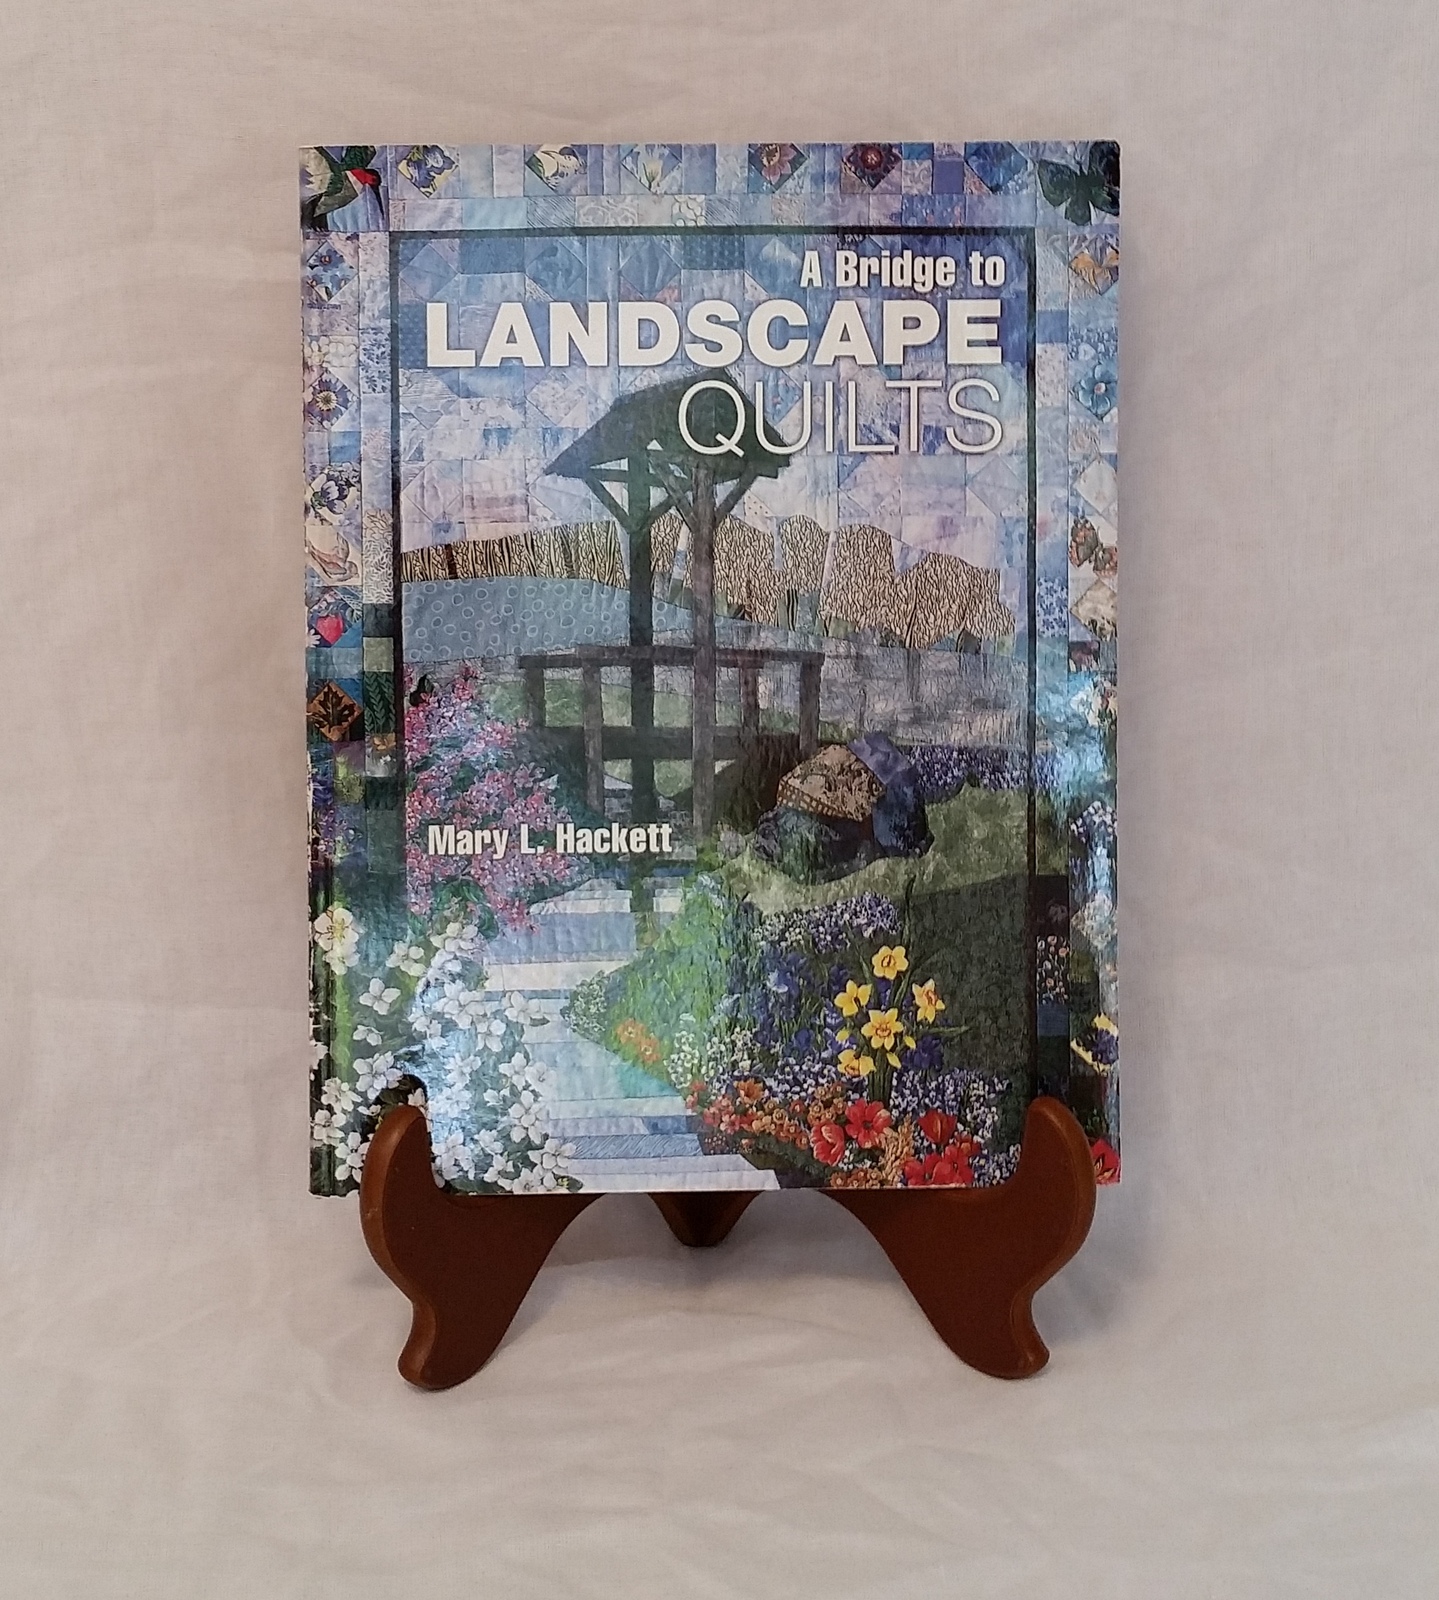 Landscape Quilts Book by Mary Hackett, American Quilter's Society - $8.95